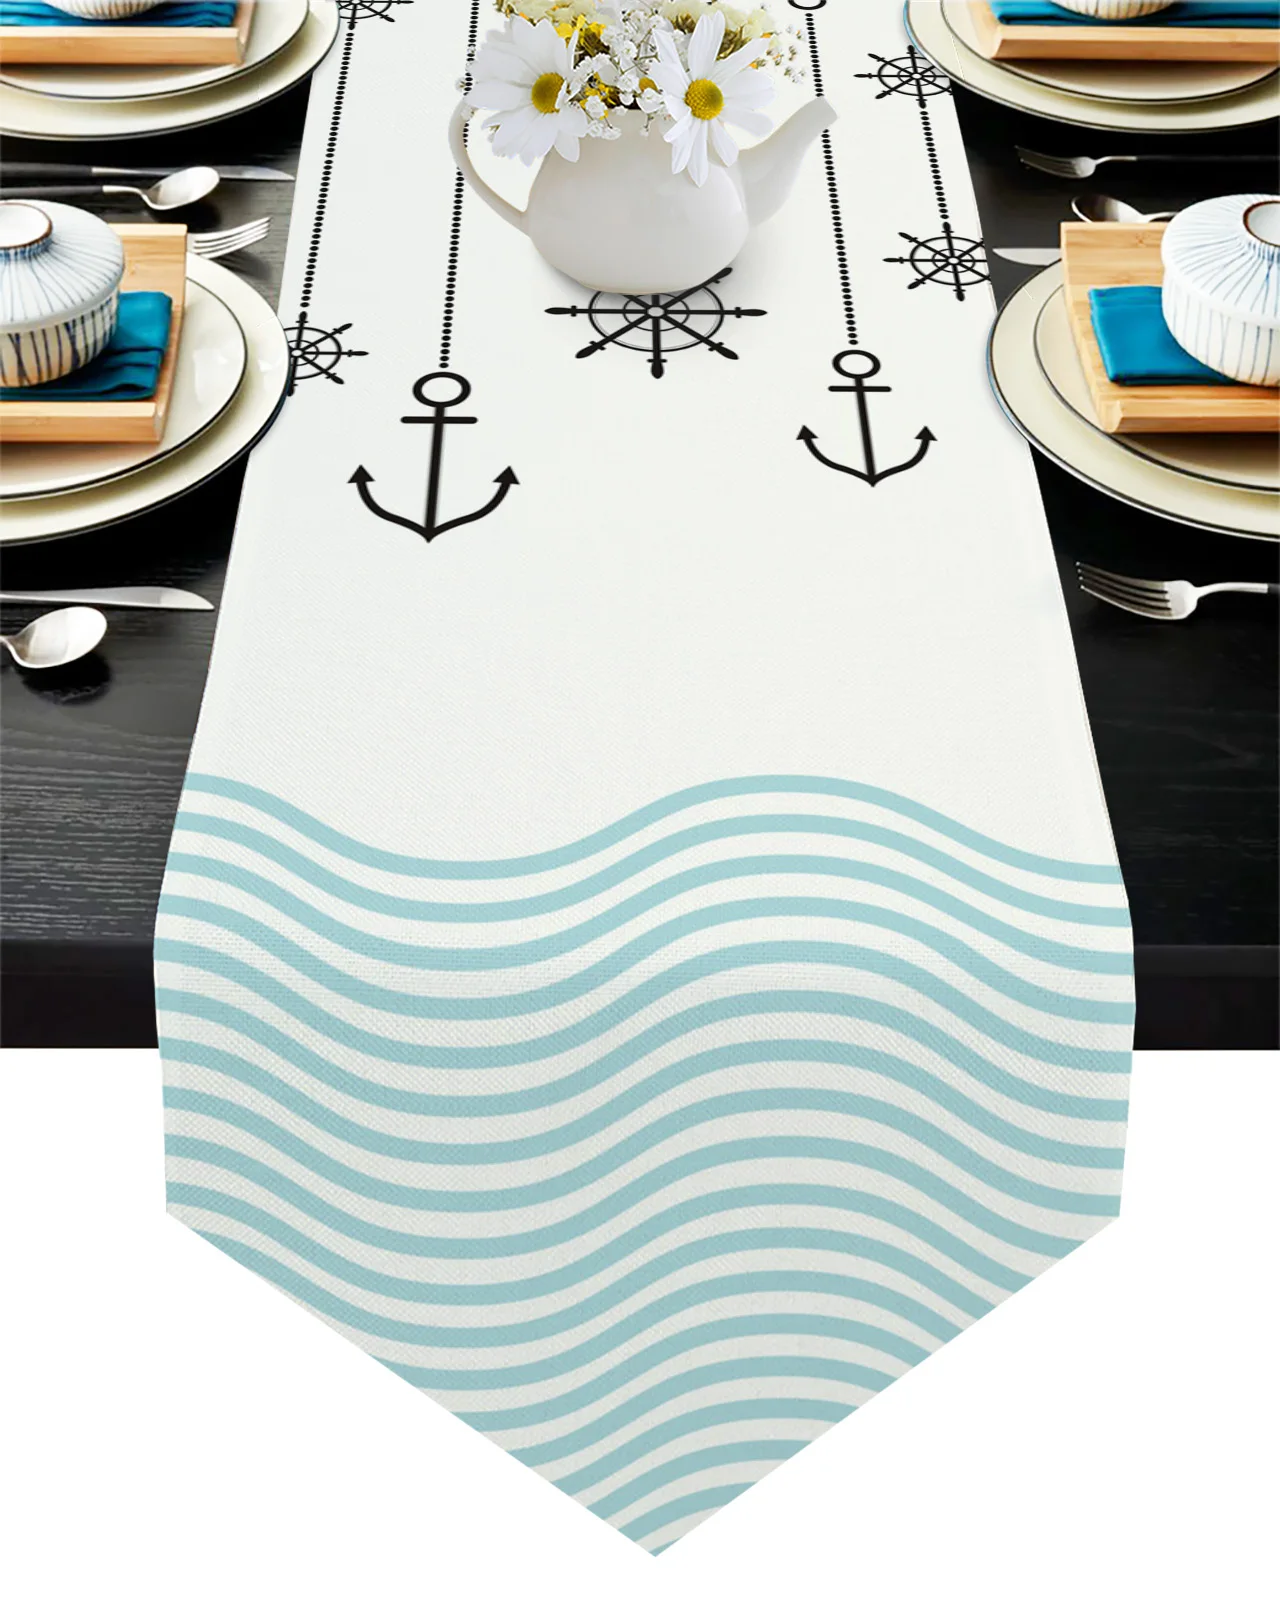 Nautical Motifs Waves Anchors Table Runner Wedding Party Table